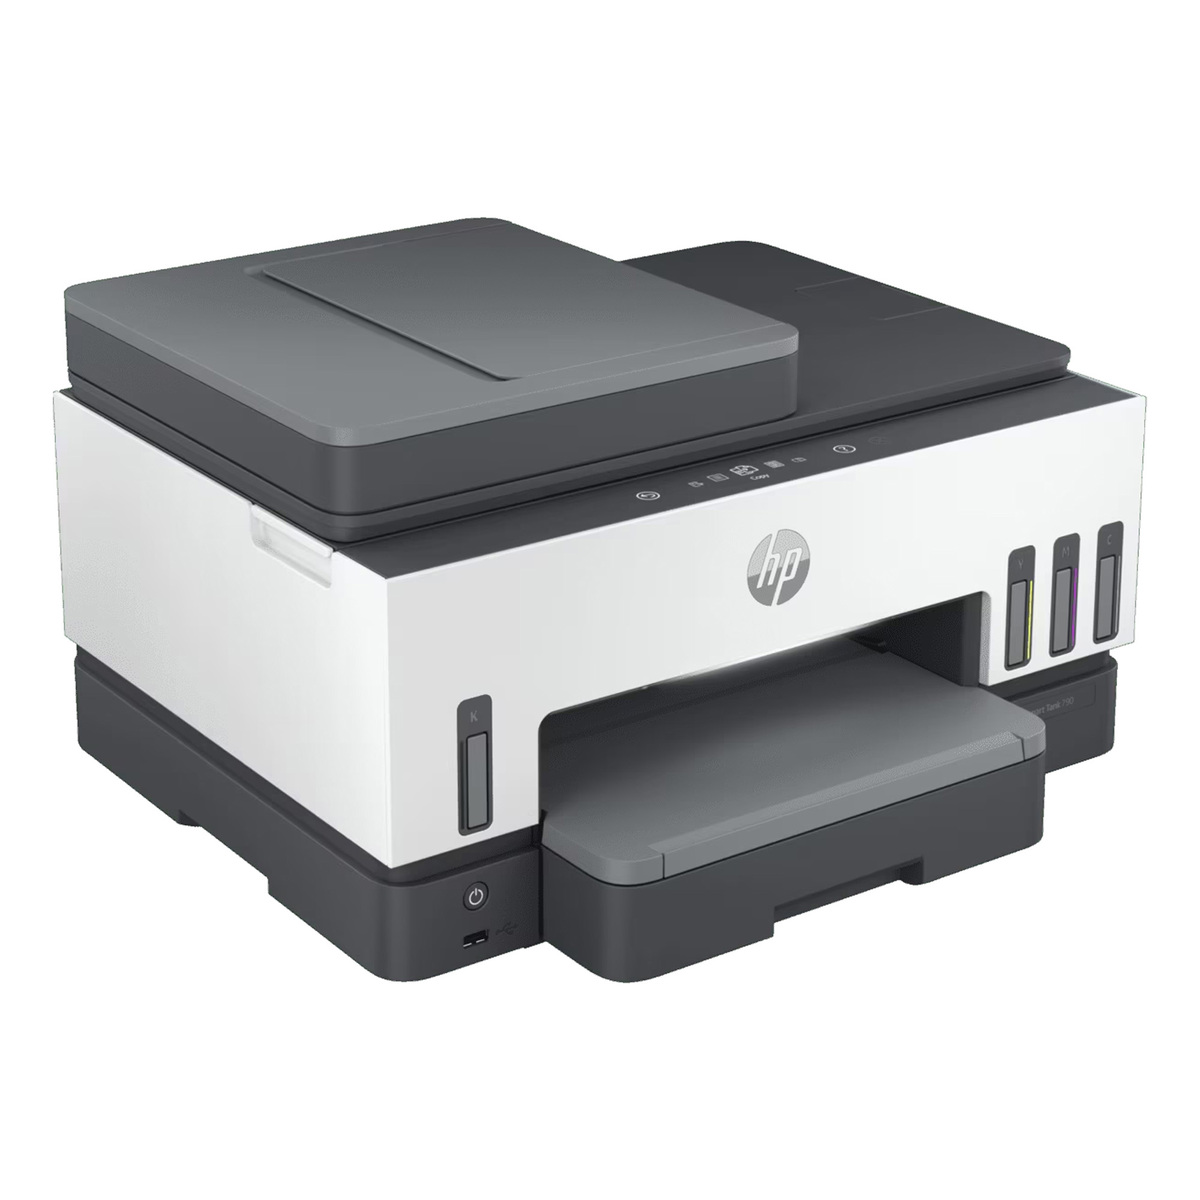 HP Smart Tank 790 Wireless All-in-One Ink Tank Printer, White/Gray, 4WF66A